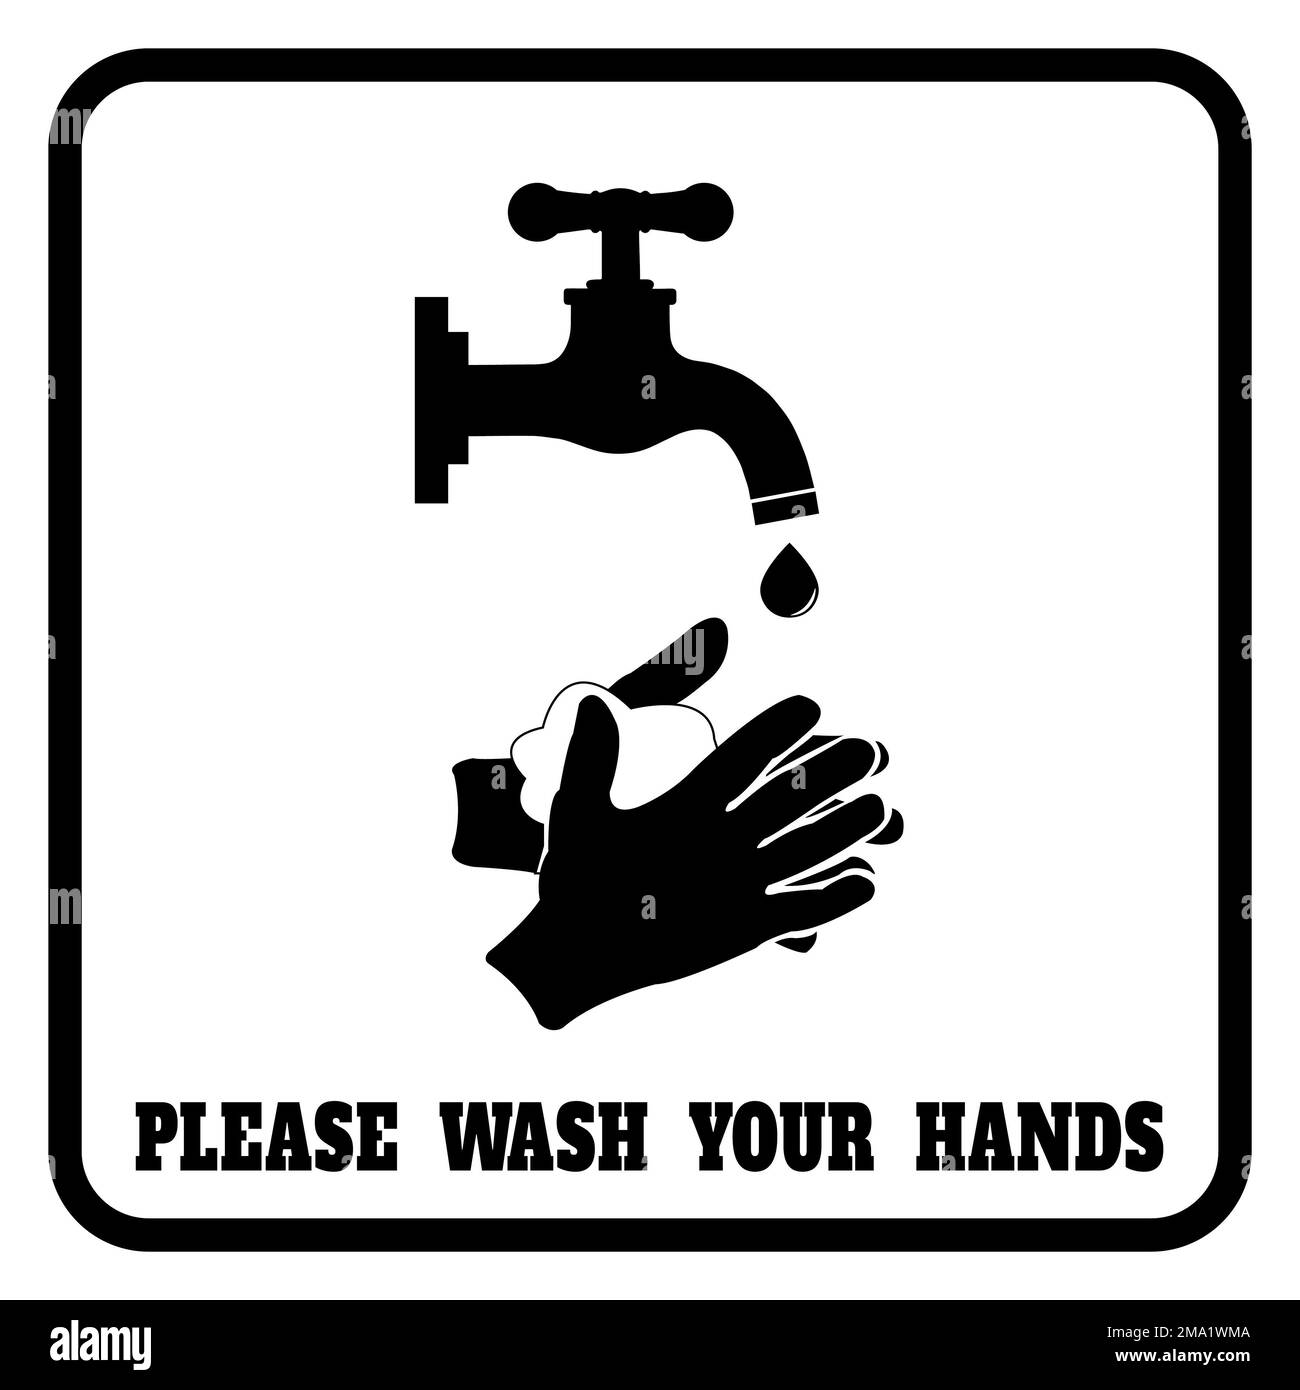 Hand washing mandatory sign for stop germs vector image. This Wash Hands Safety Sign is suitable for all workplaces, toilets, and kitchens. Stock Photo